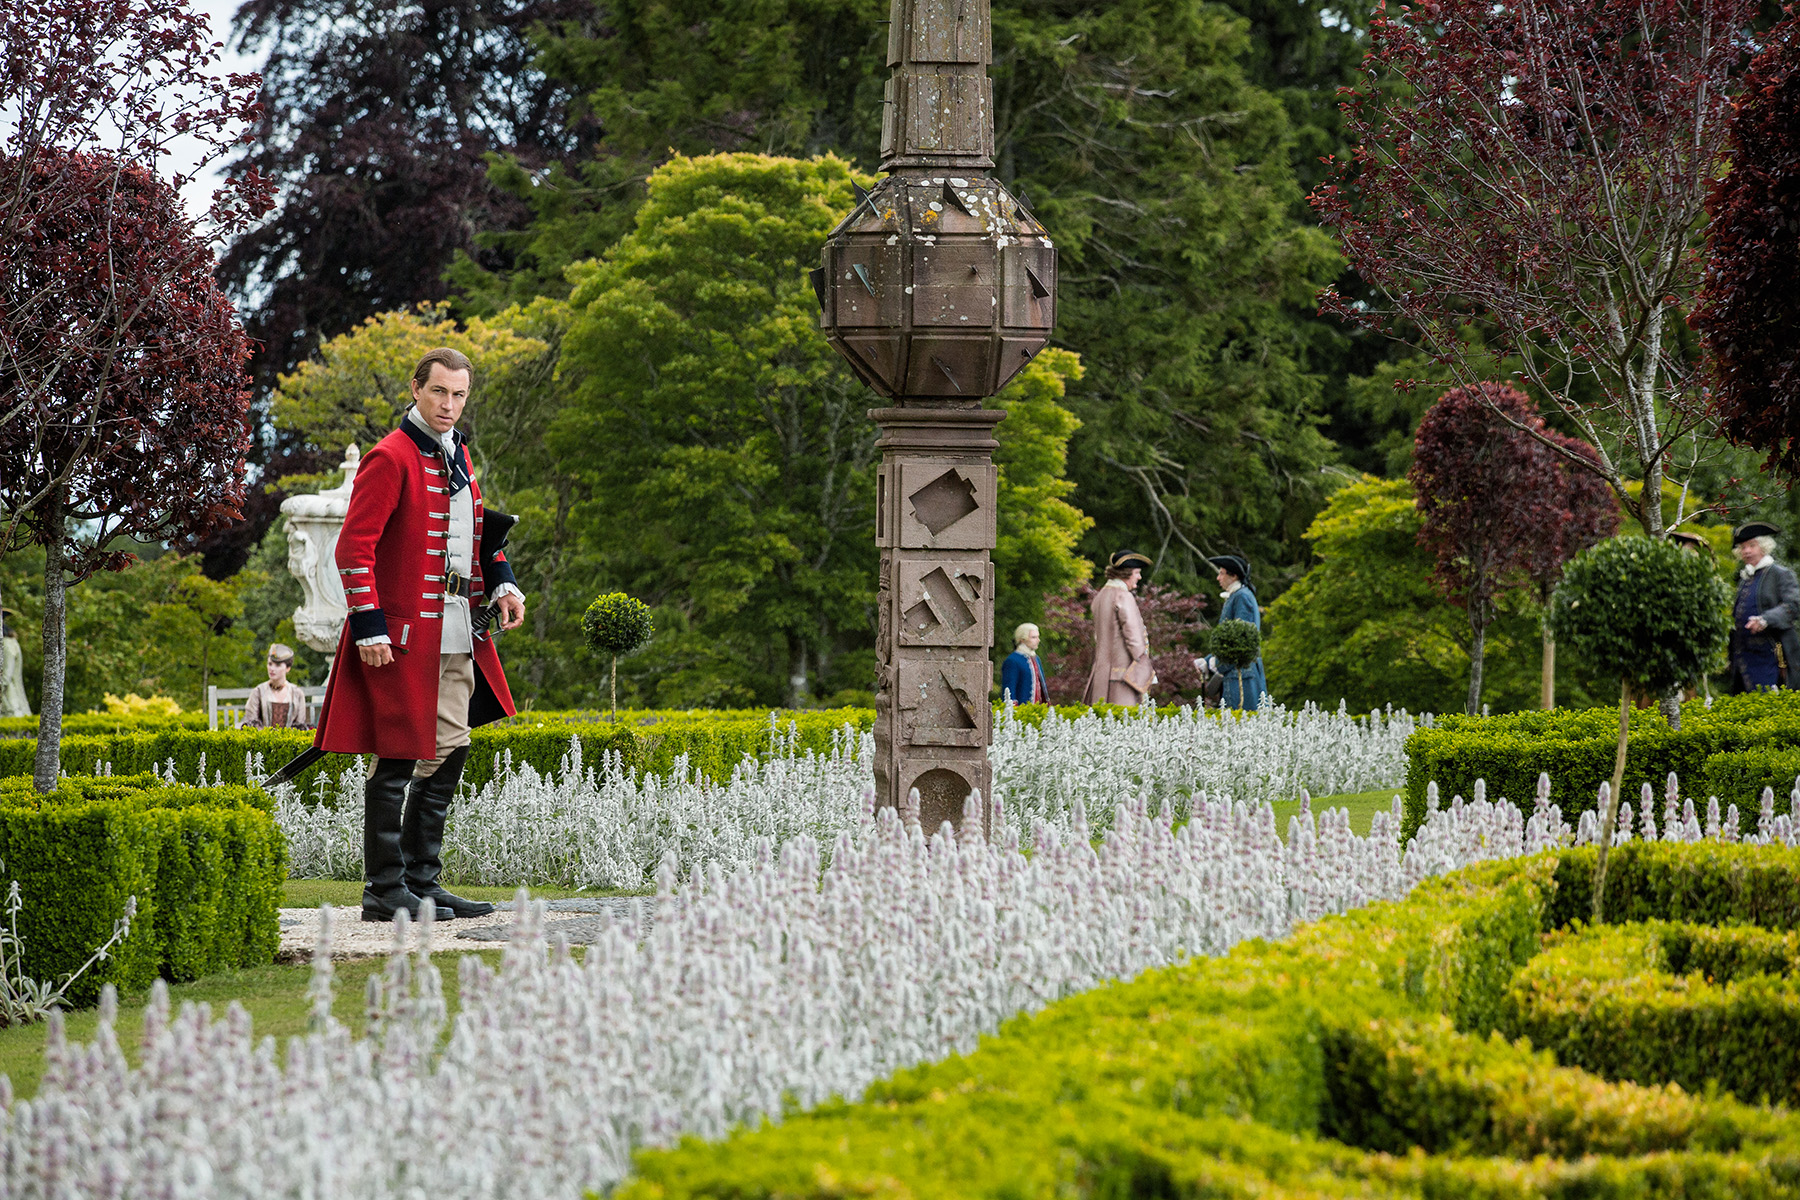 Jack Randall stands in a garden. Killing Jack Randall would also be pretty sweet. #Iamjustsaying